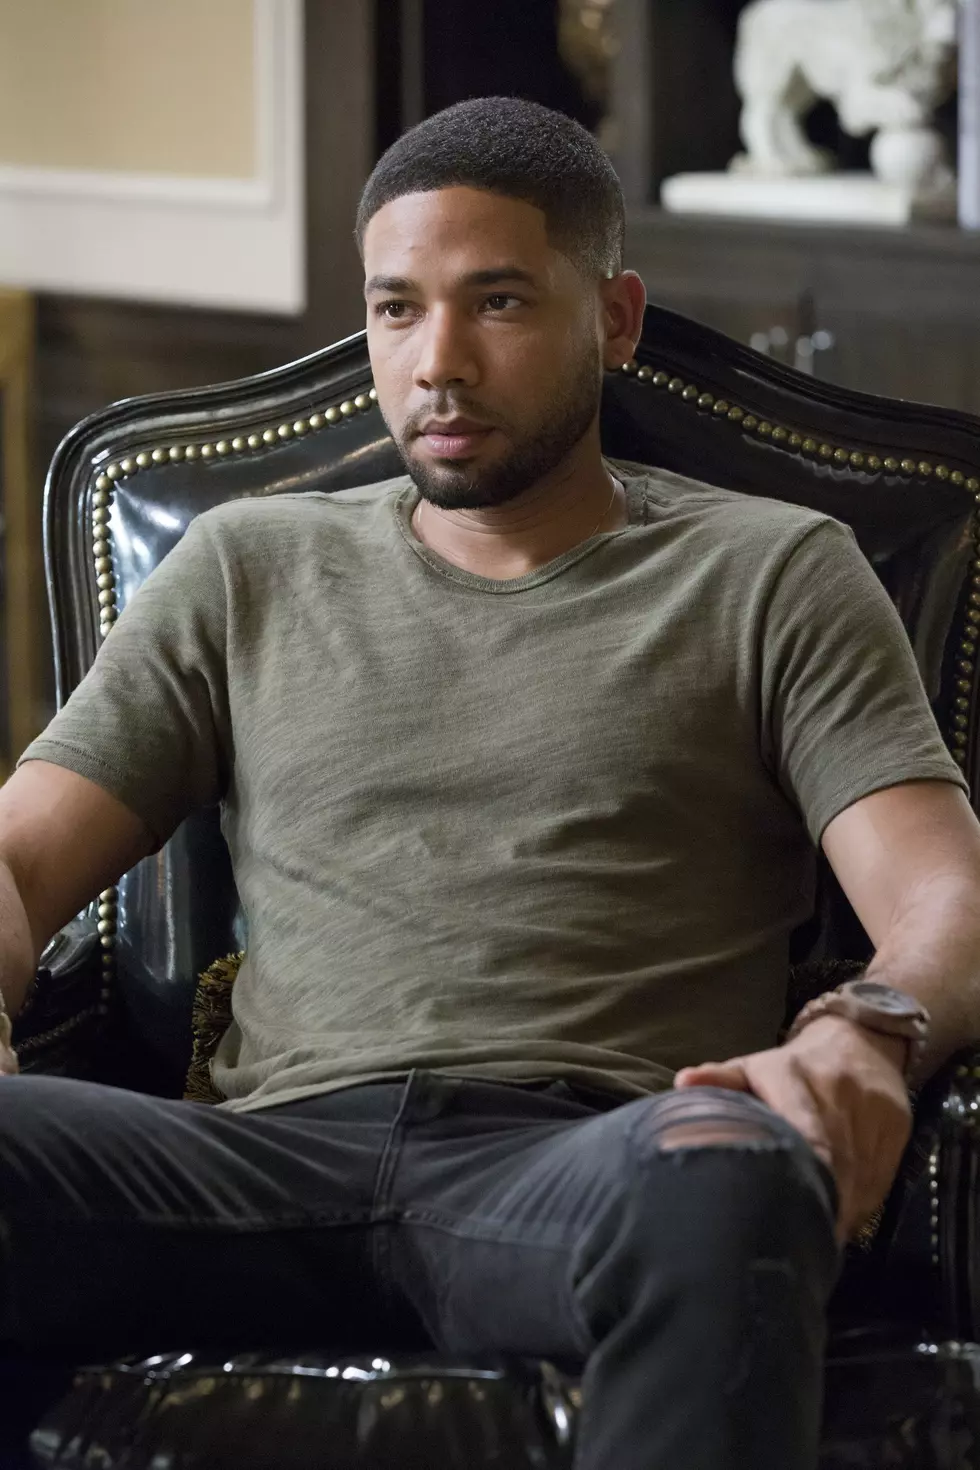 Disgraced ‘Empire’ Star Jussie Smollet’s Family Ties To Louisiana